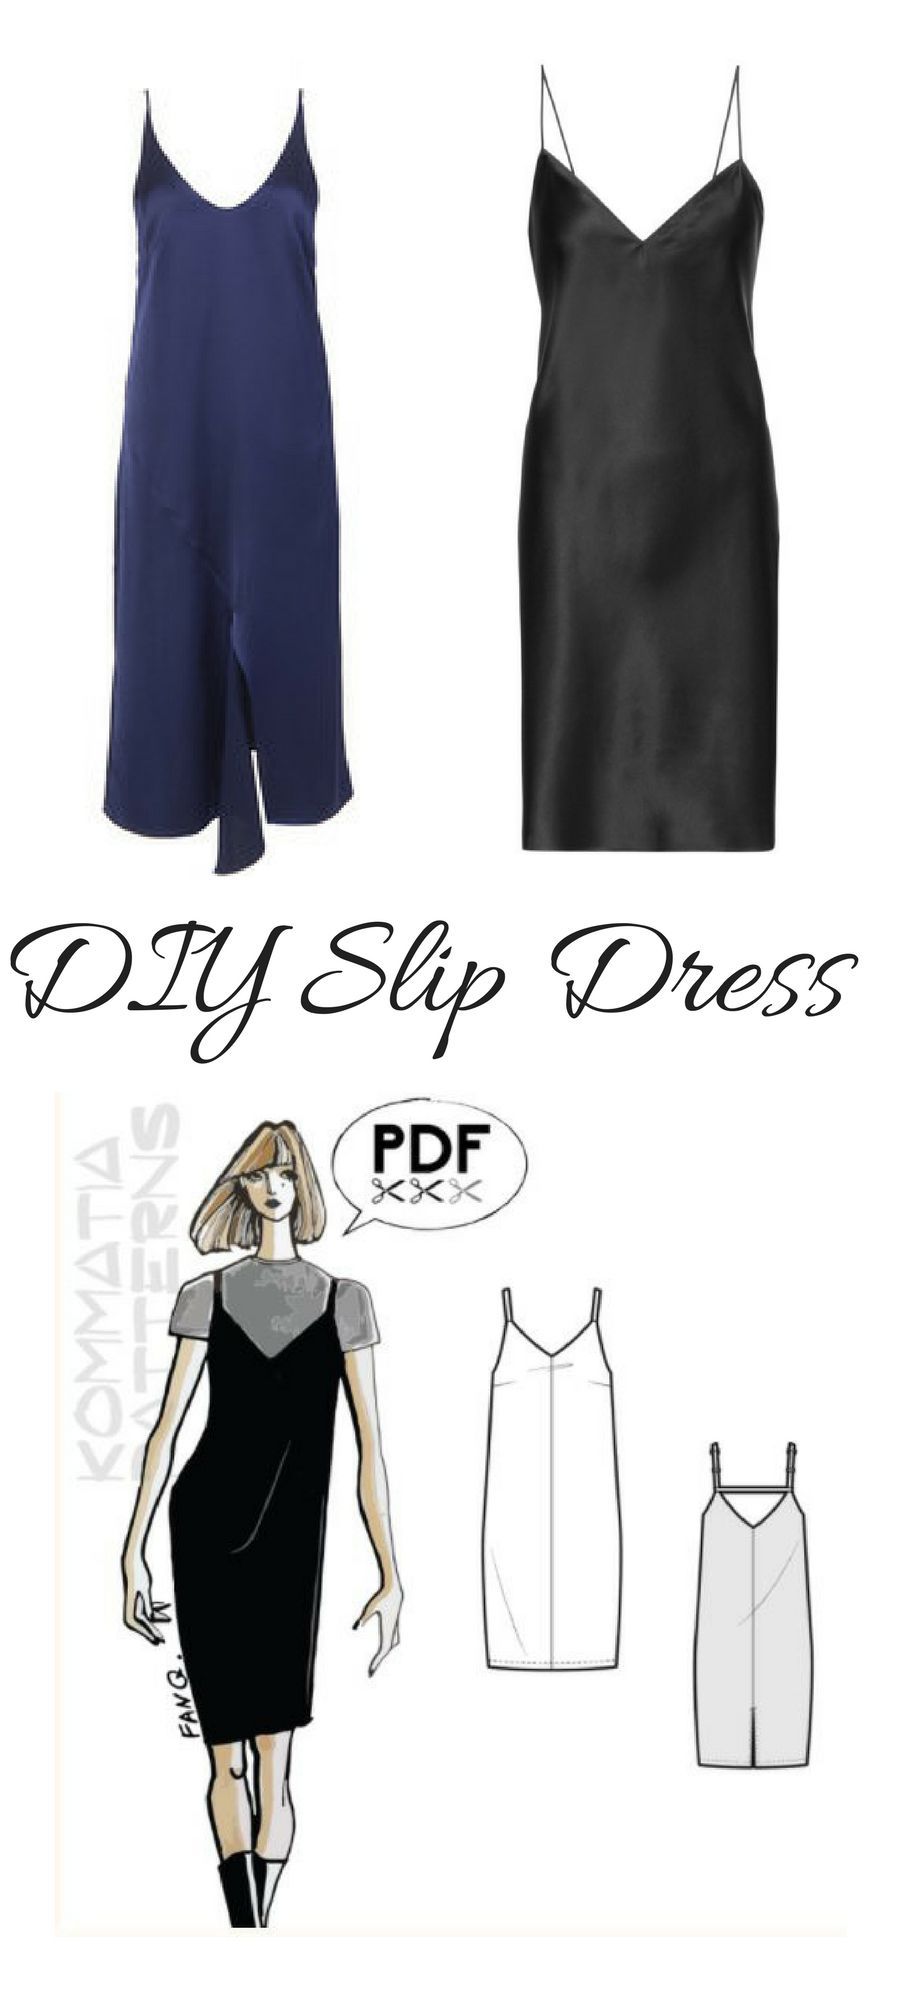 Elegant Picture of Diy Clothes Sewing Easy - figswoodfiredbistro.com -   12 dress DIY ideas